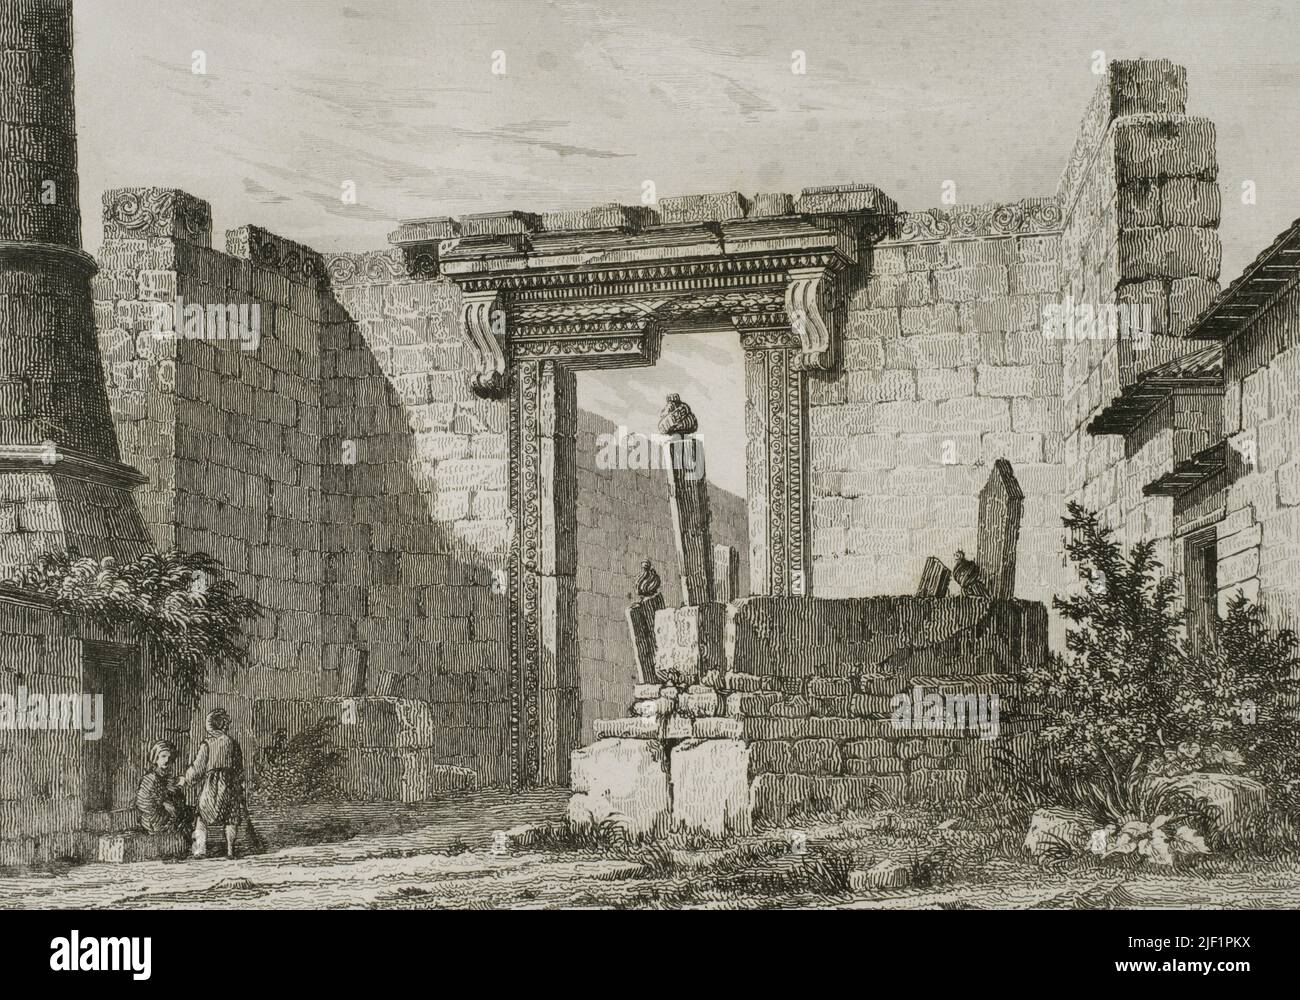 Angora (Ankara). Turkey. Monument of Ancyra or Temple of Augustus and Rome in Ancyra. During Roman times the city was called Ancyra. Engraving drawn by Préaux. Lemaitre direxit. 'Panorama Universal. Historia de Armenia', 1838. Stock Photo